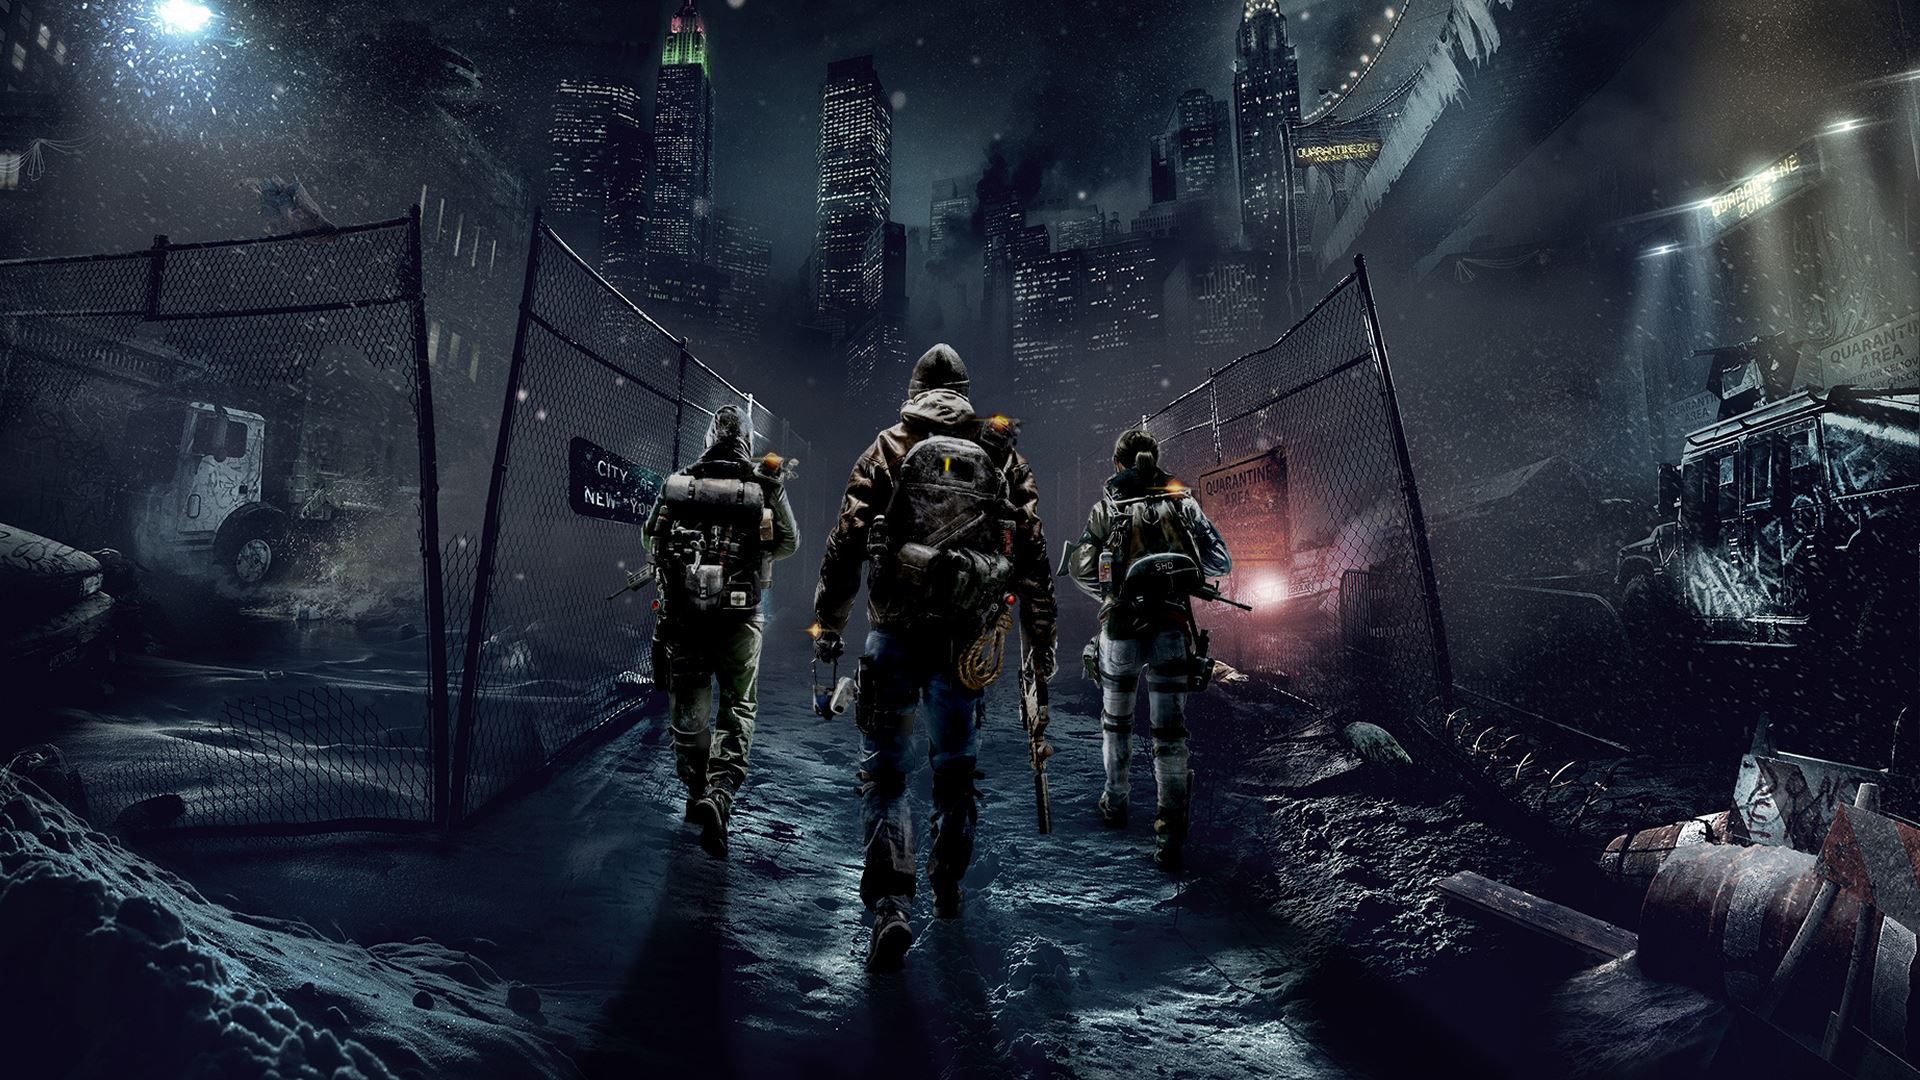 The Division Wallpapers Pictures Images HD Wallpapers Download Free Map Images Wallpaper [wallpaper376.blogspot.com]